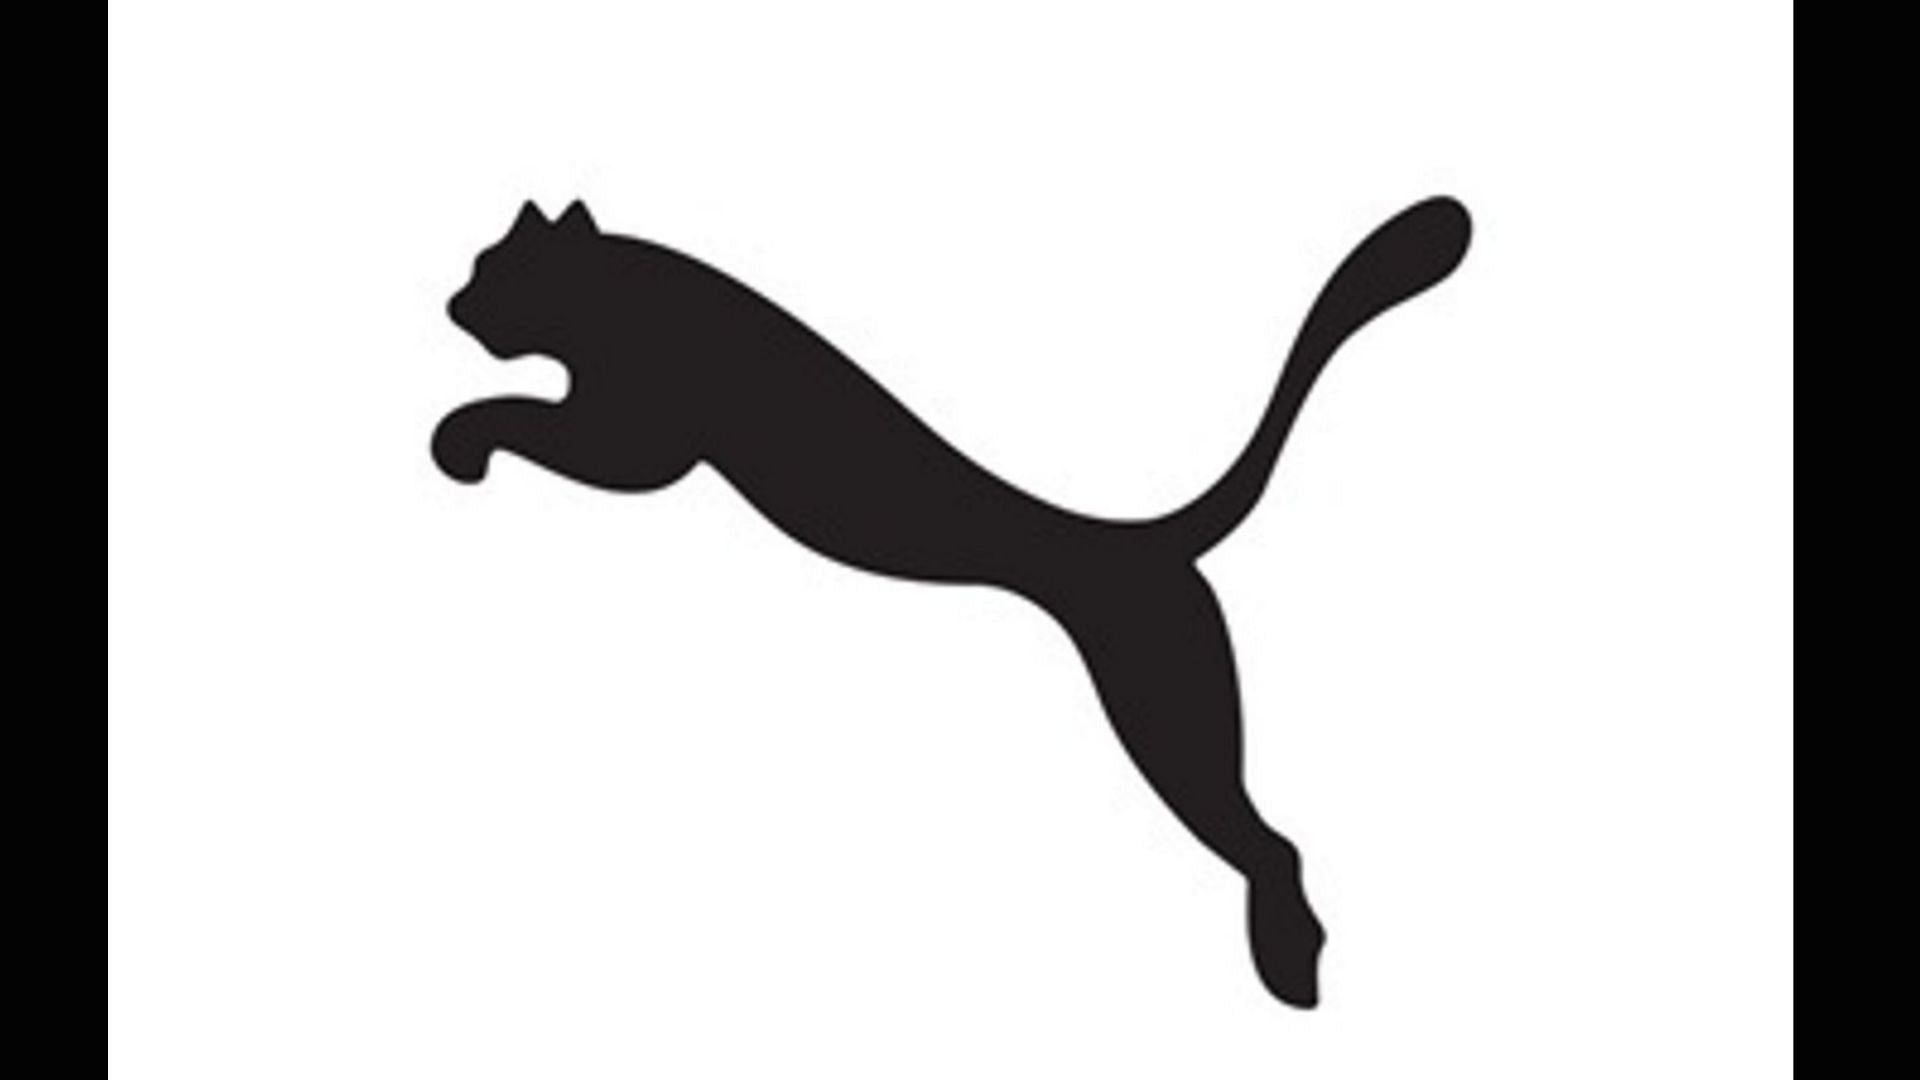 Puma logo history: 5 things to know about the iconic design